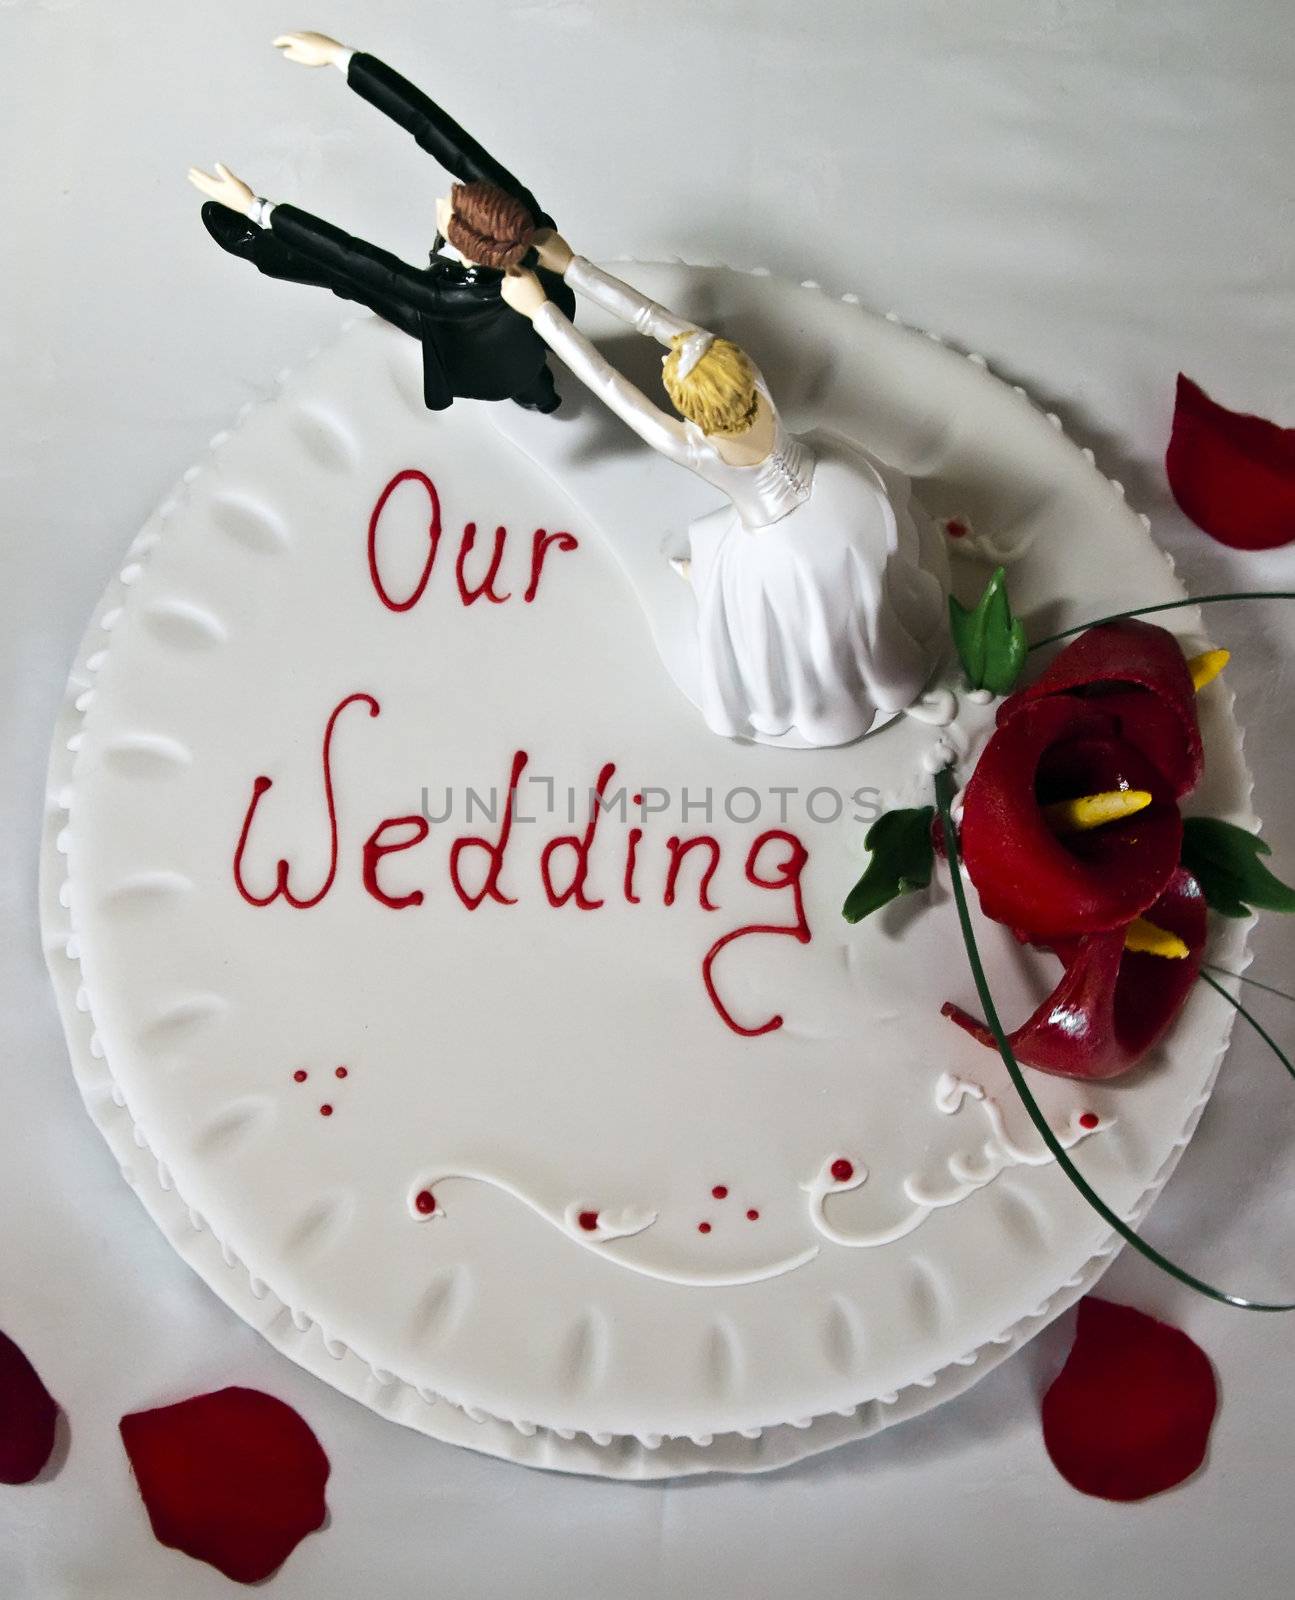 Wedding cake on a white backdrop with red rose petals